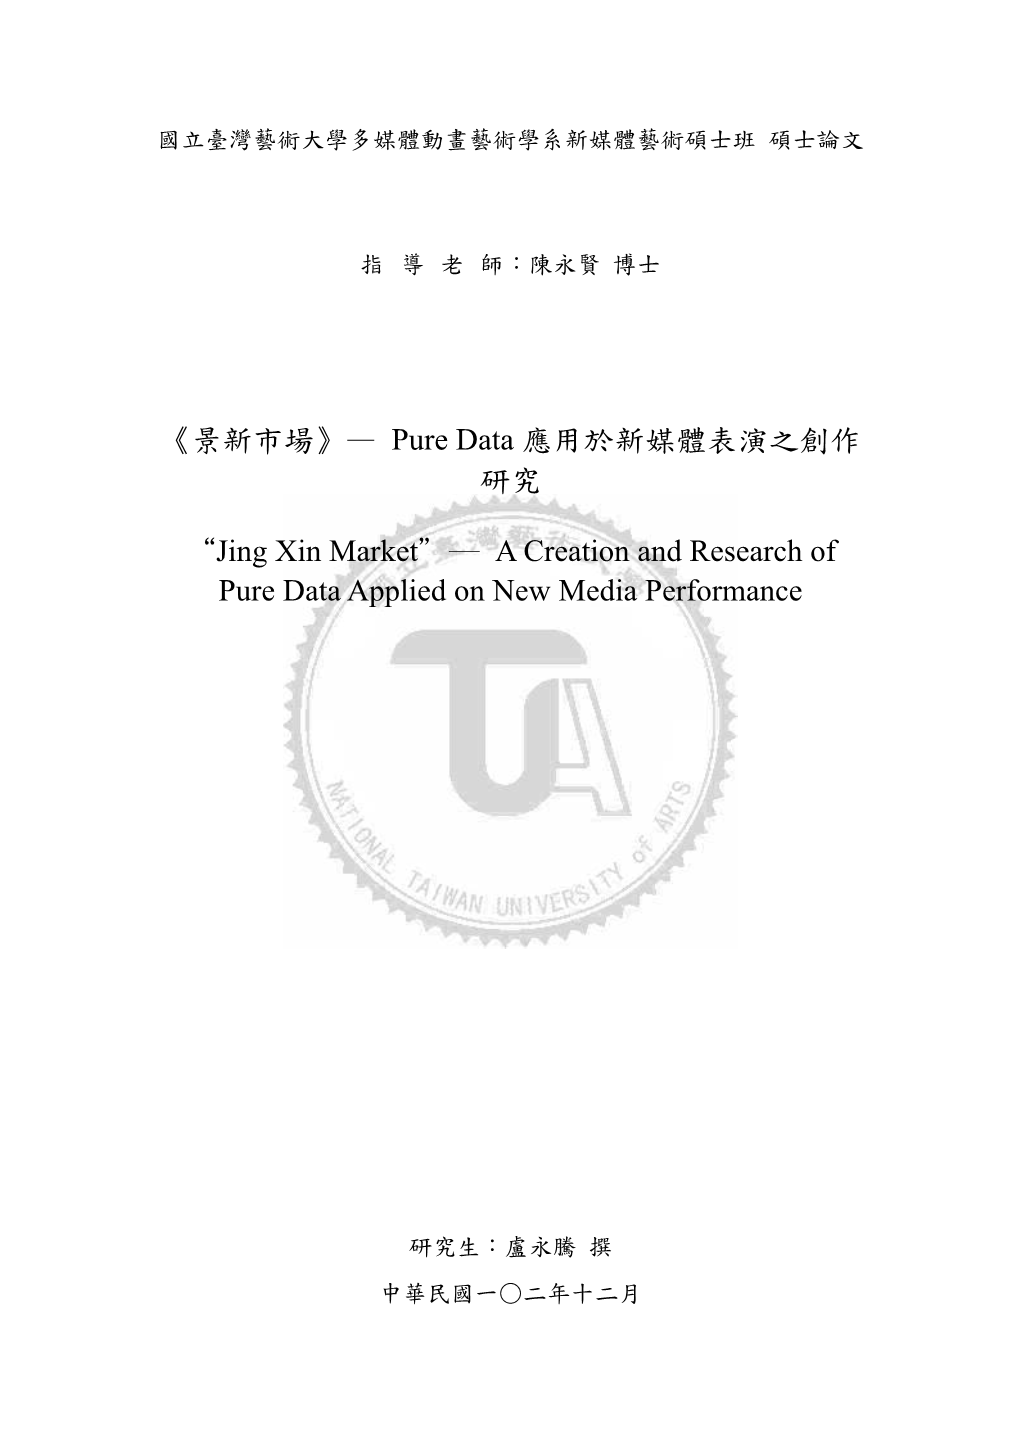 — Pure Data “Jing Xin Market a Creation and Research of Pure